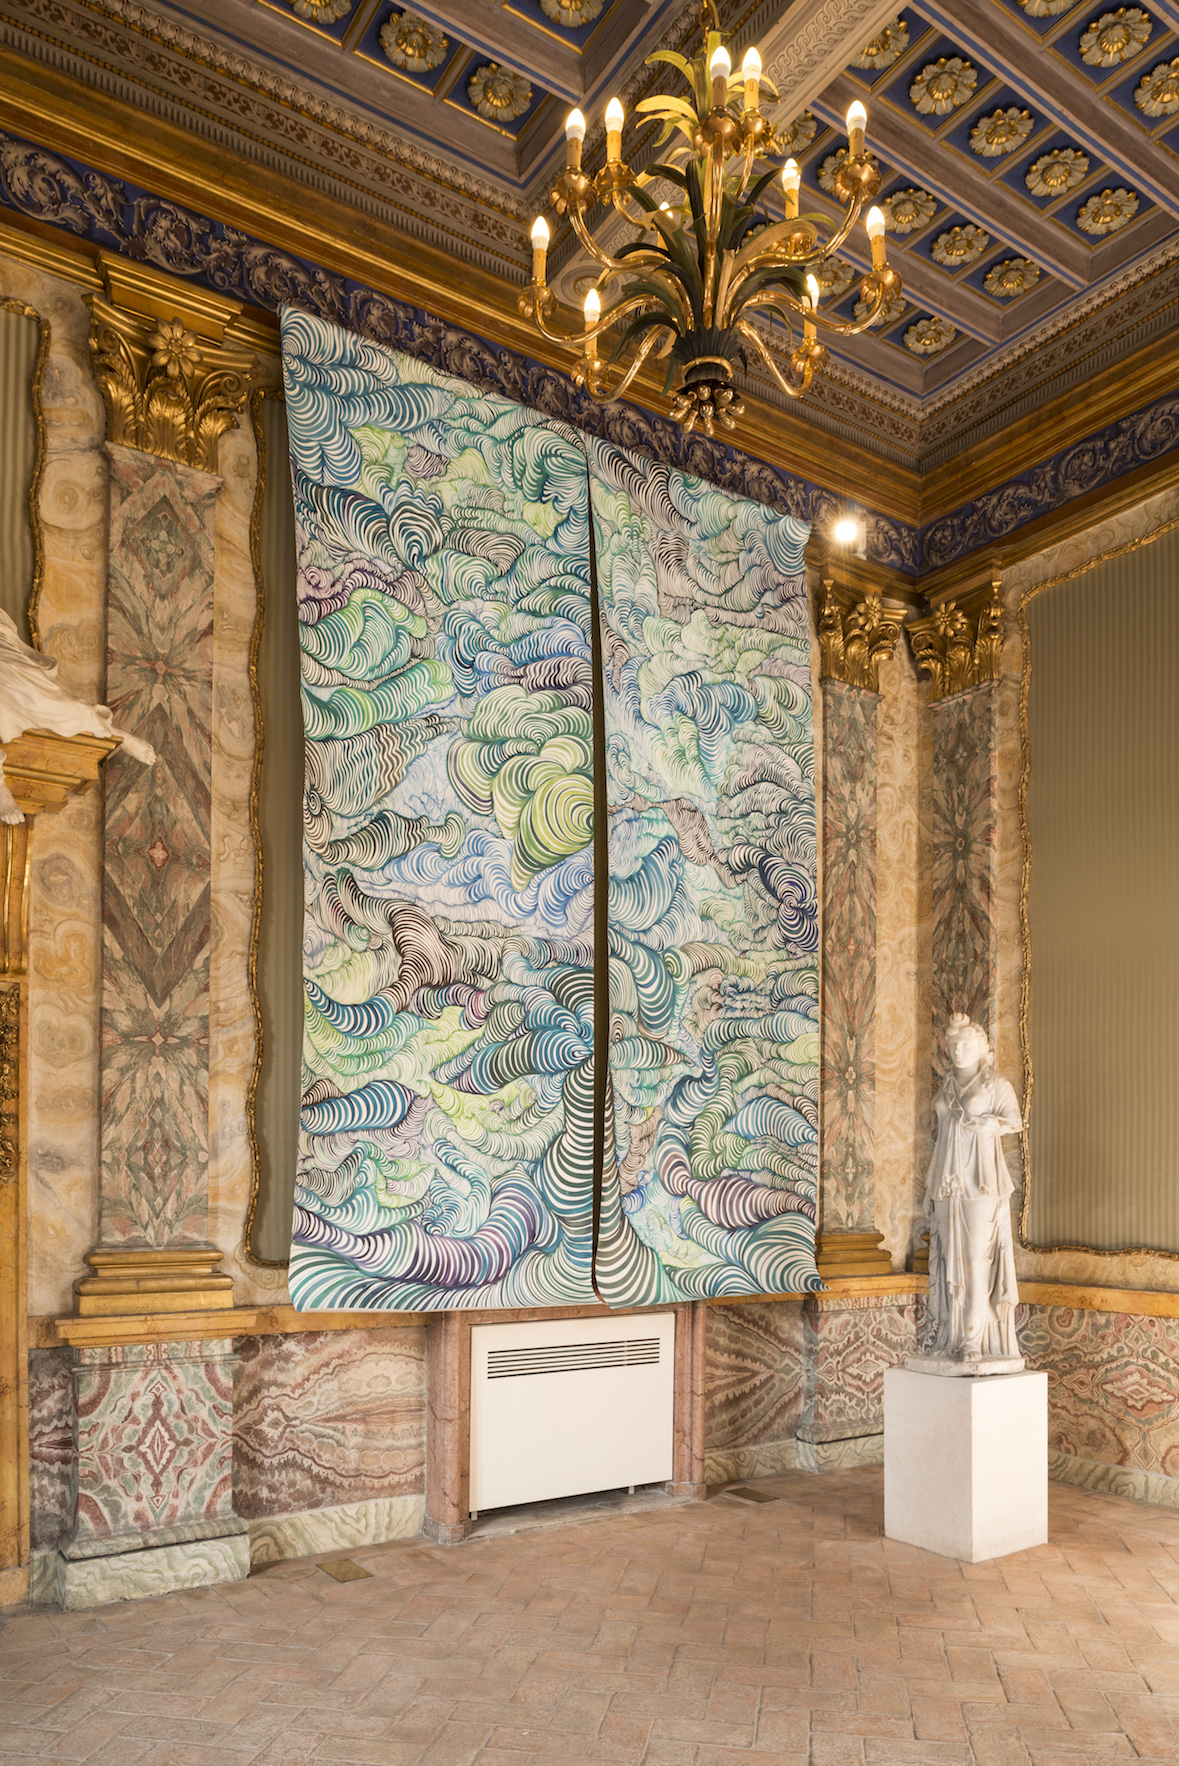 Artist Maurizio Donzelli's acrylic works at Palazzo Altemps (Rome) for the group show "Ad Altemps"